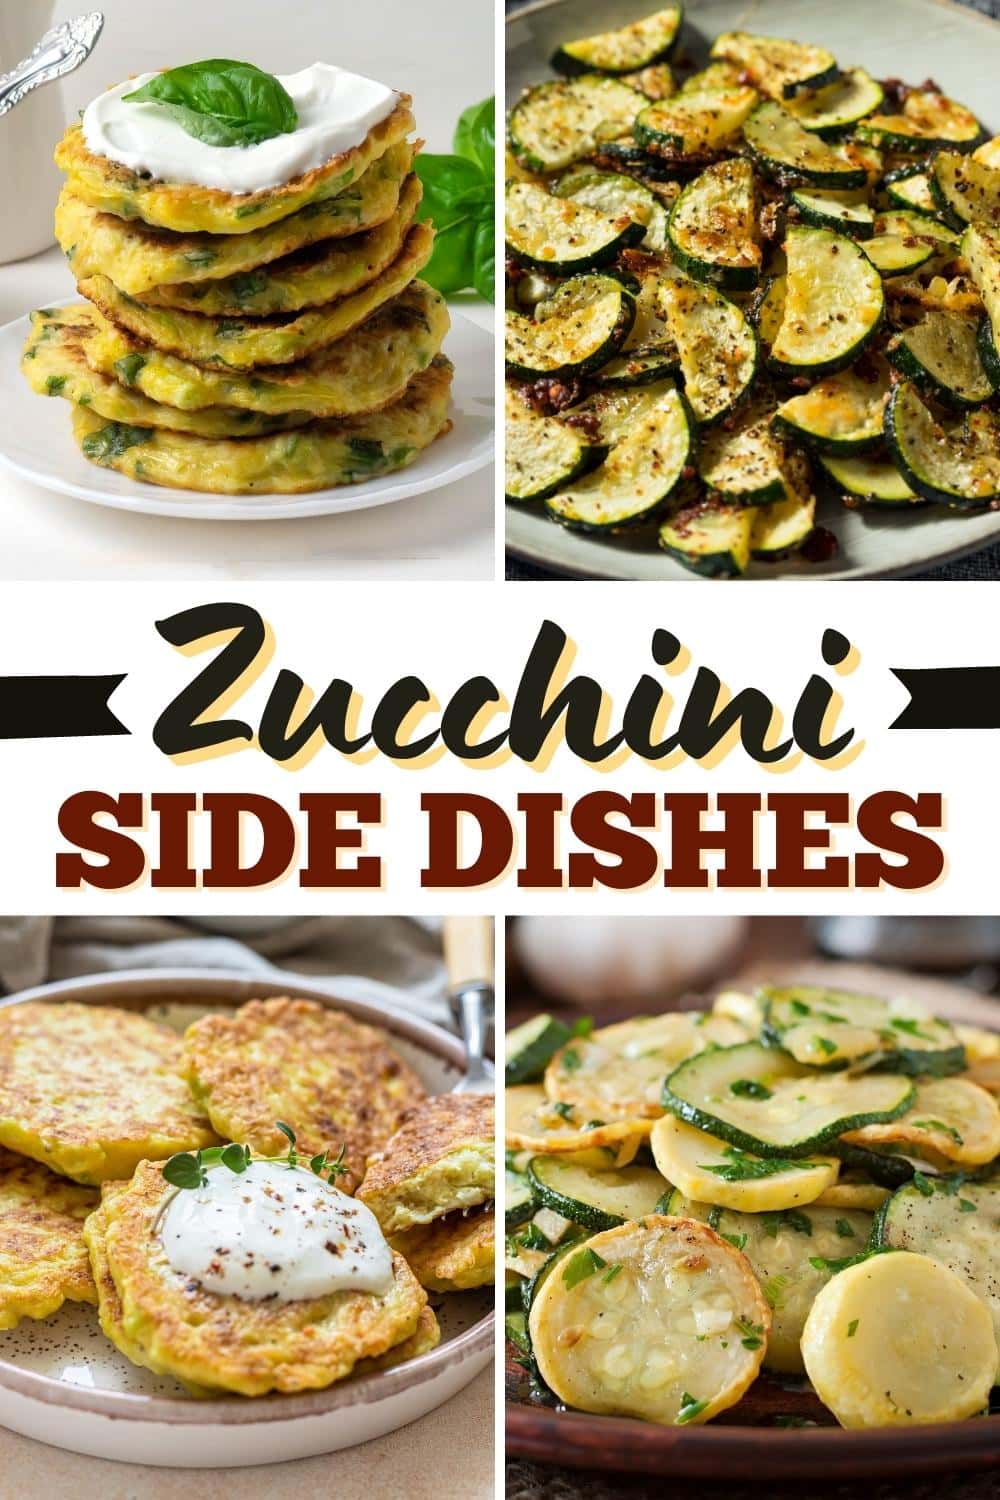 25 Best Zucchini Side Dishes for Summer - Insanely Good